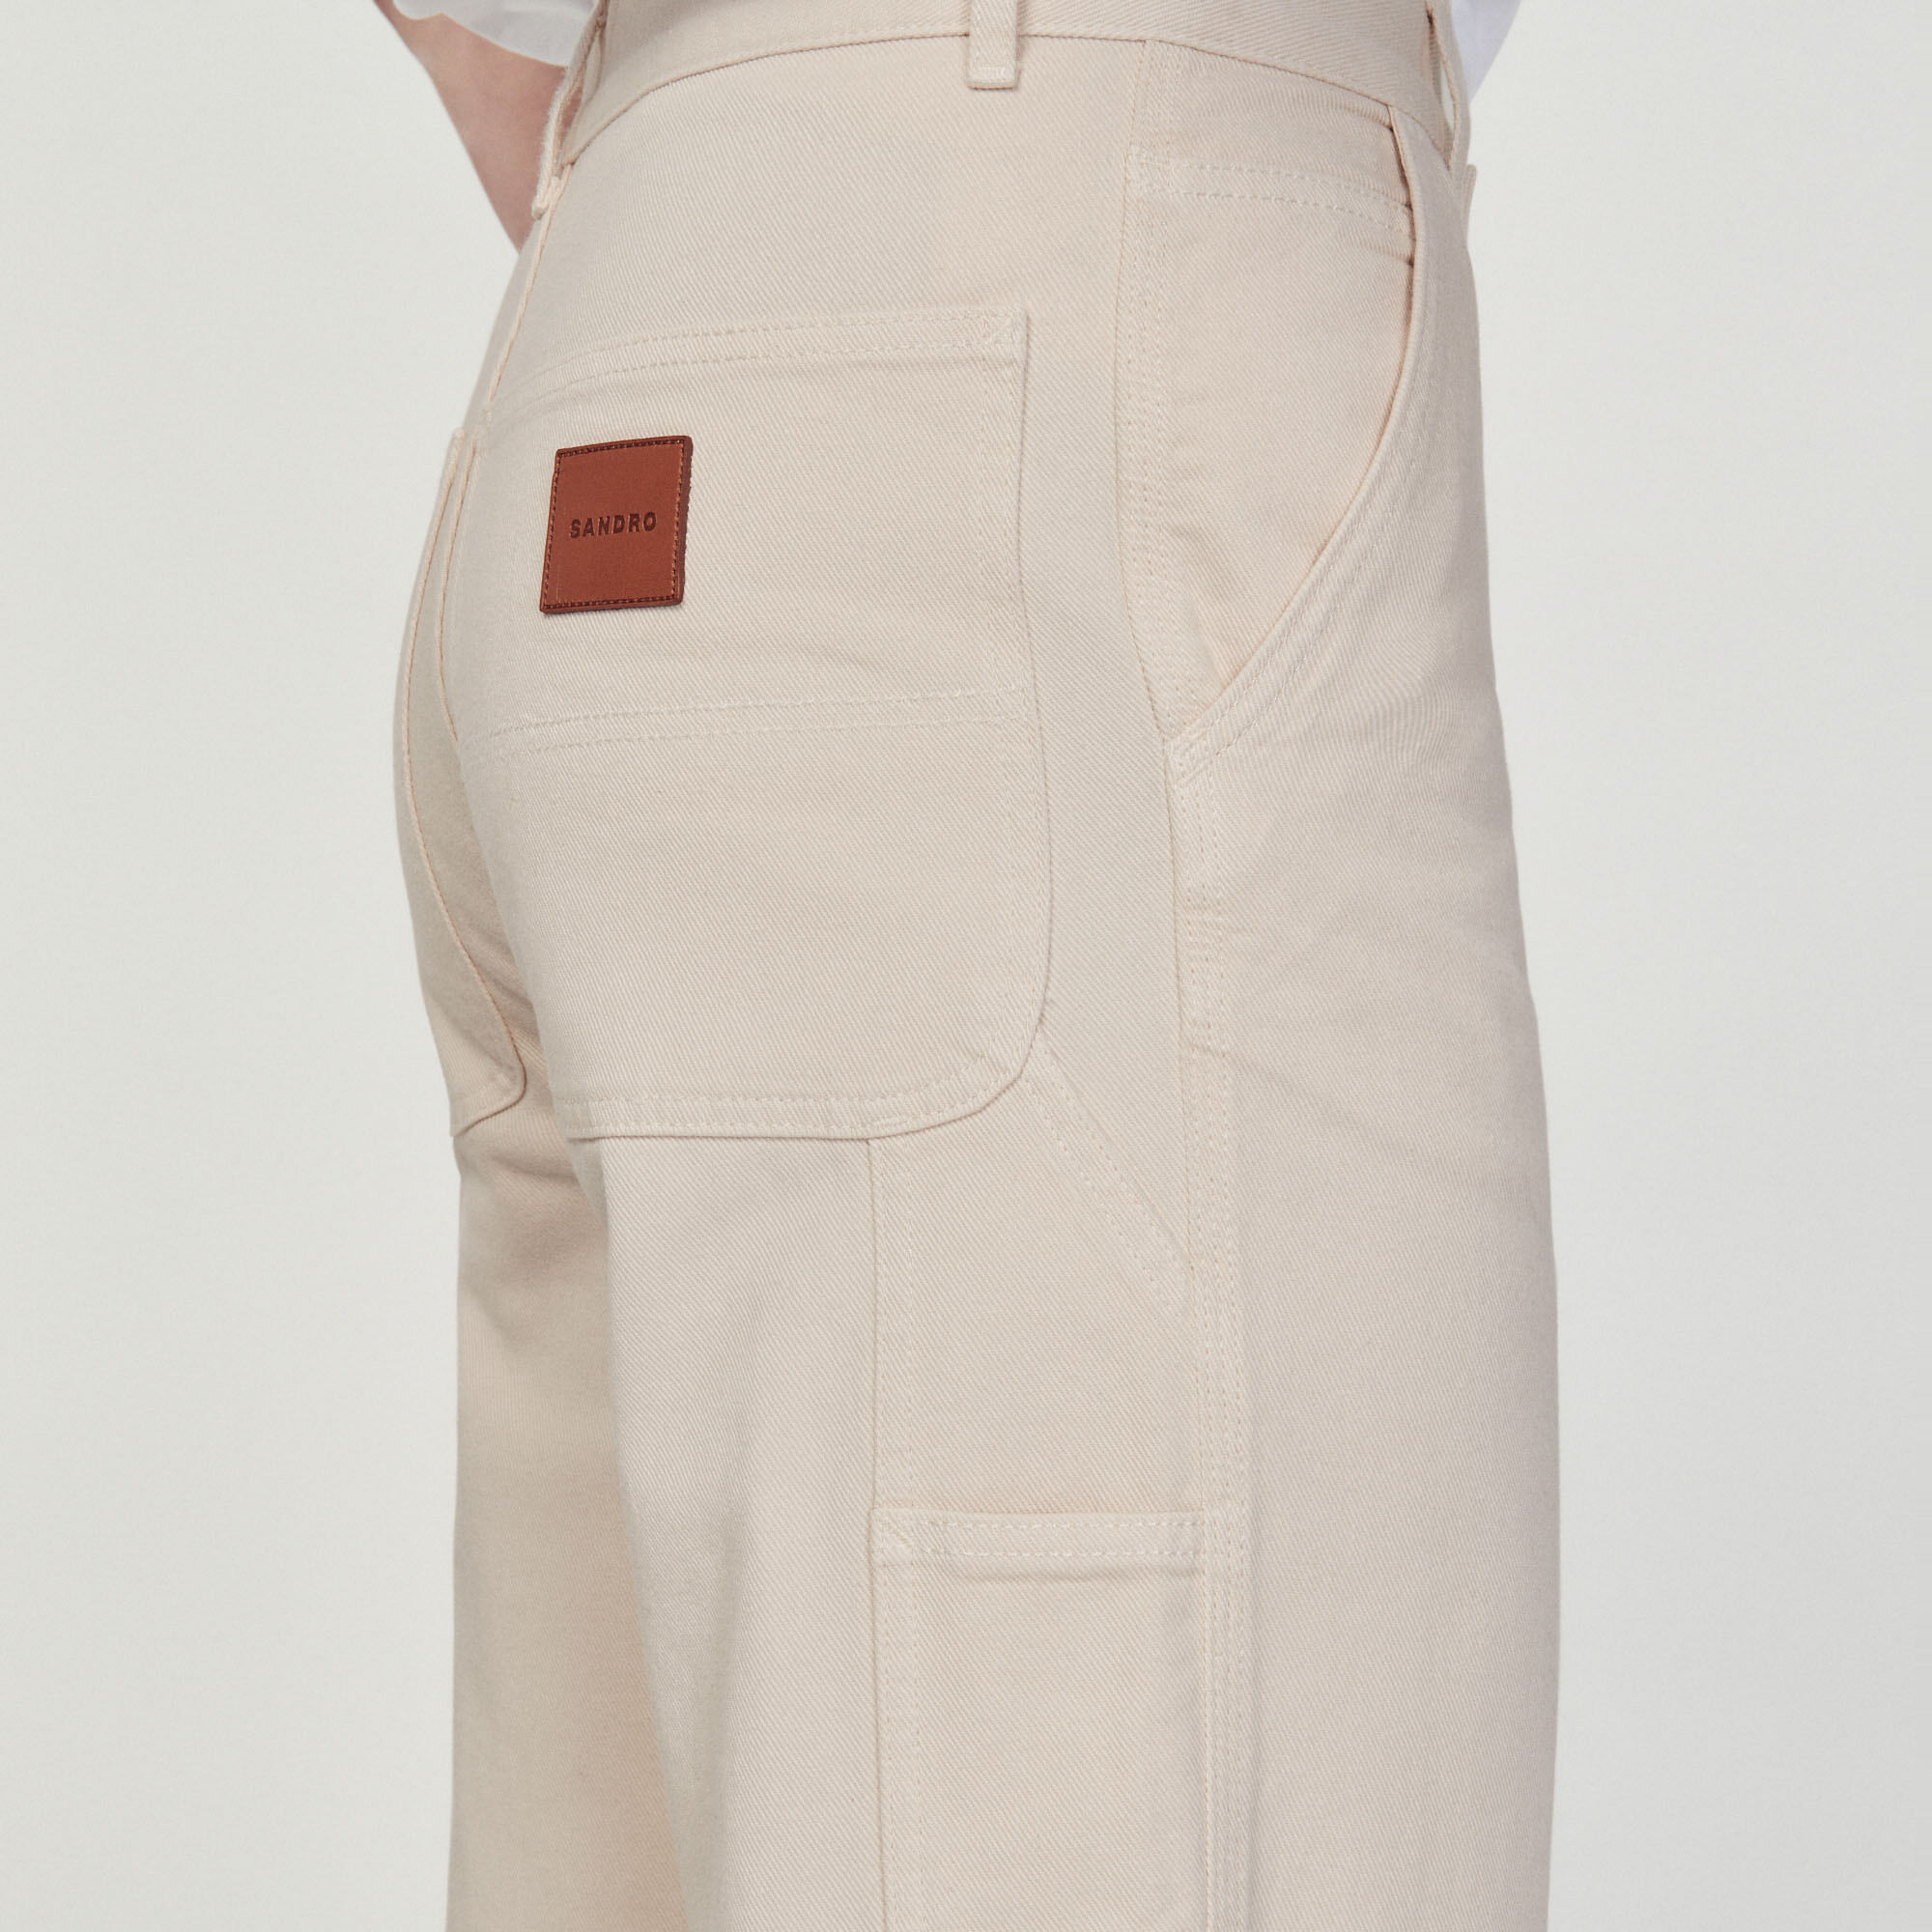 Carhartt Carpenter Trousers  W36 L28  The Vintage Store